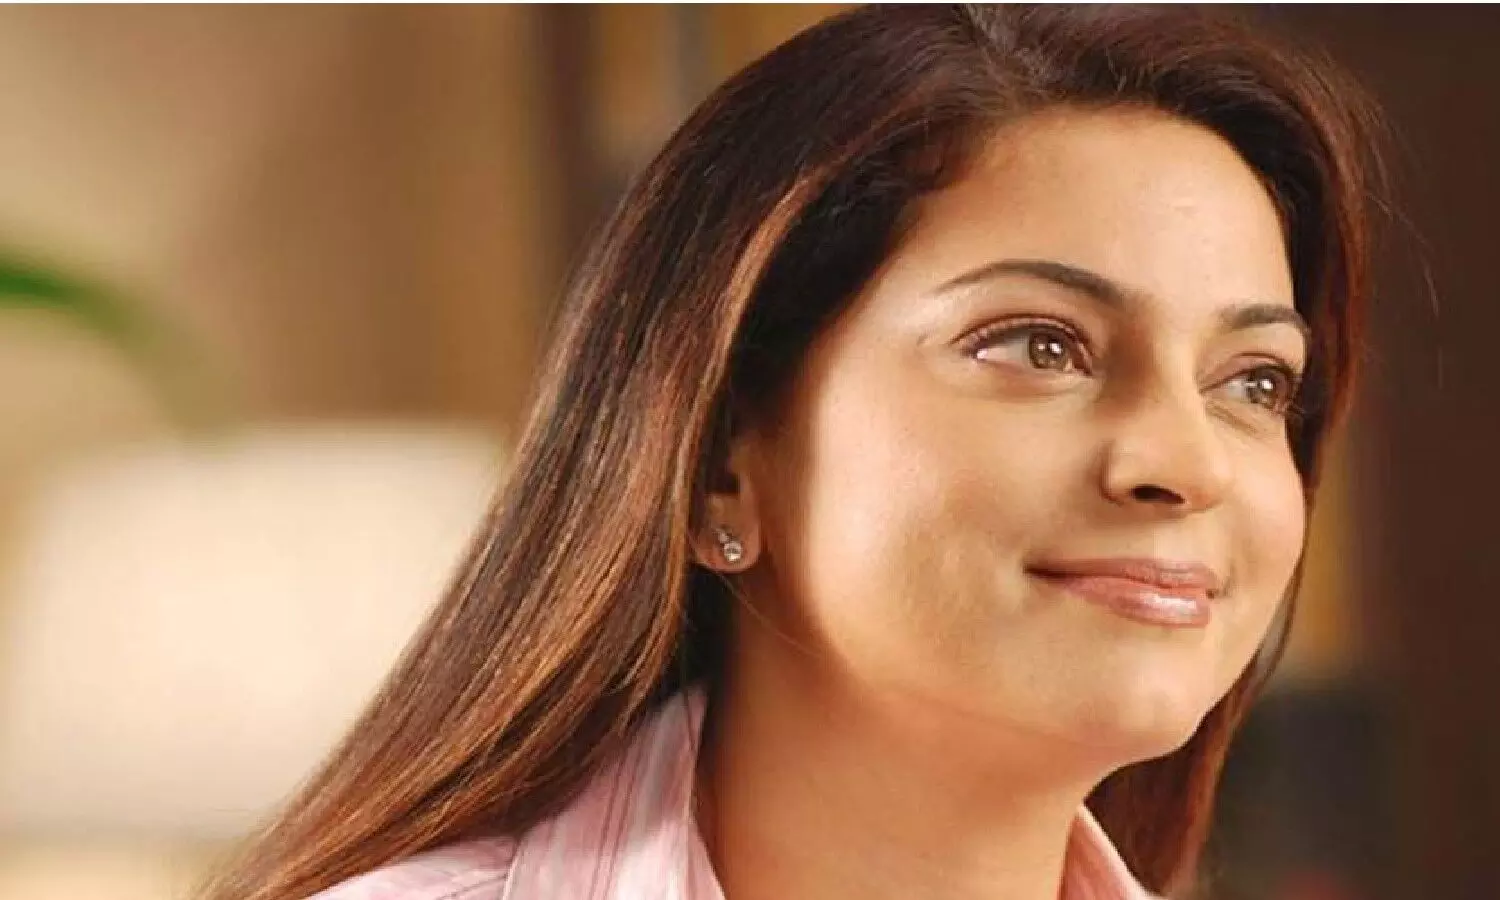 Juhi Chawla, while filing a petition in the Delhi High Court, had called the 5G wireless network in the country injurious to health.